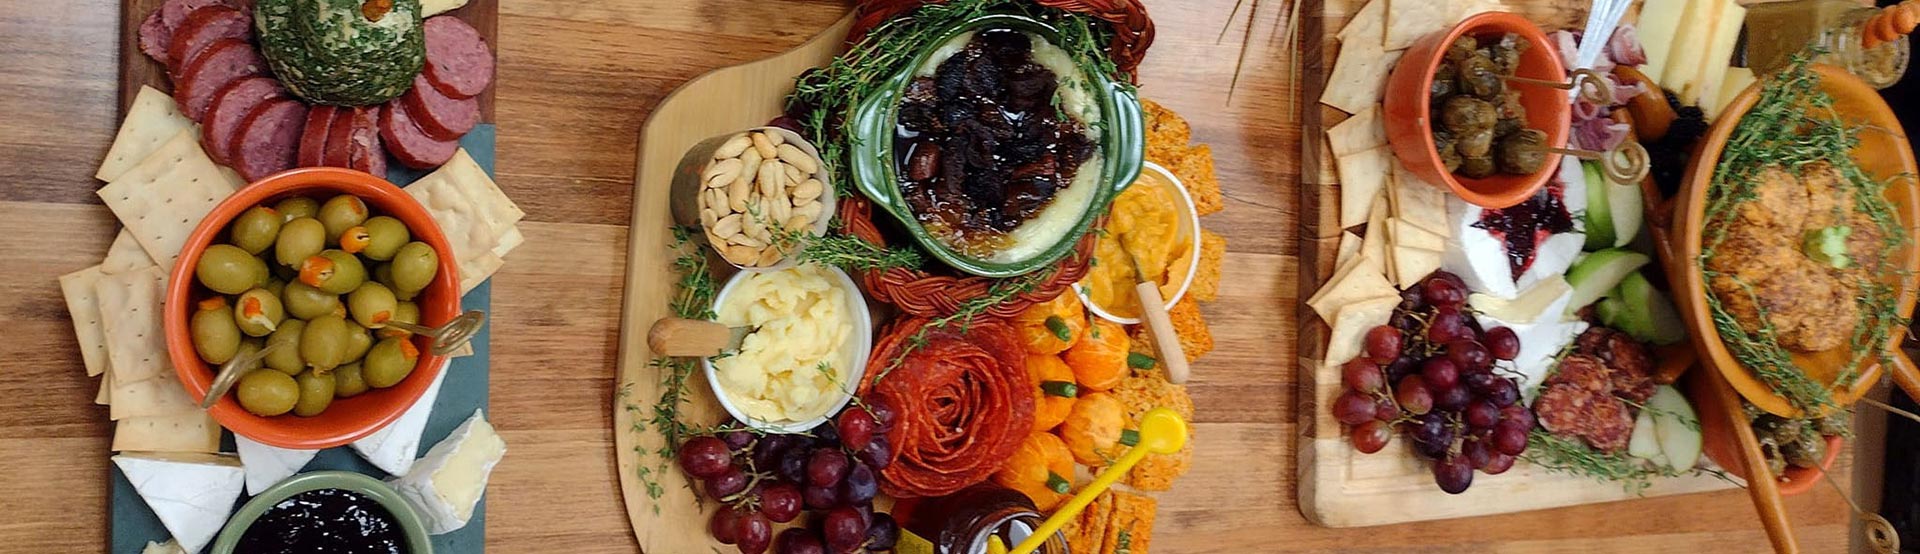 Charcuterie Boards with cheese, cold cut meats, olive oils, nuts, grapes and dips